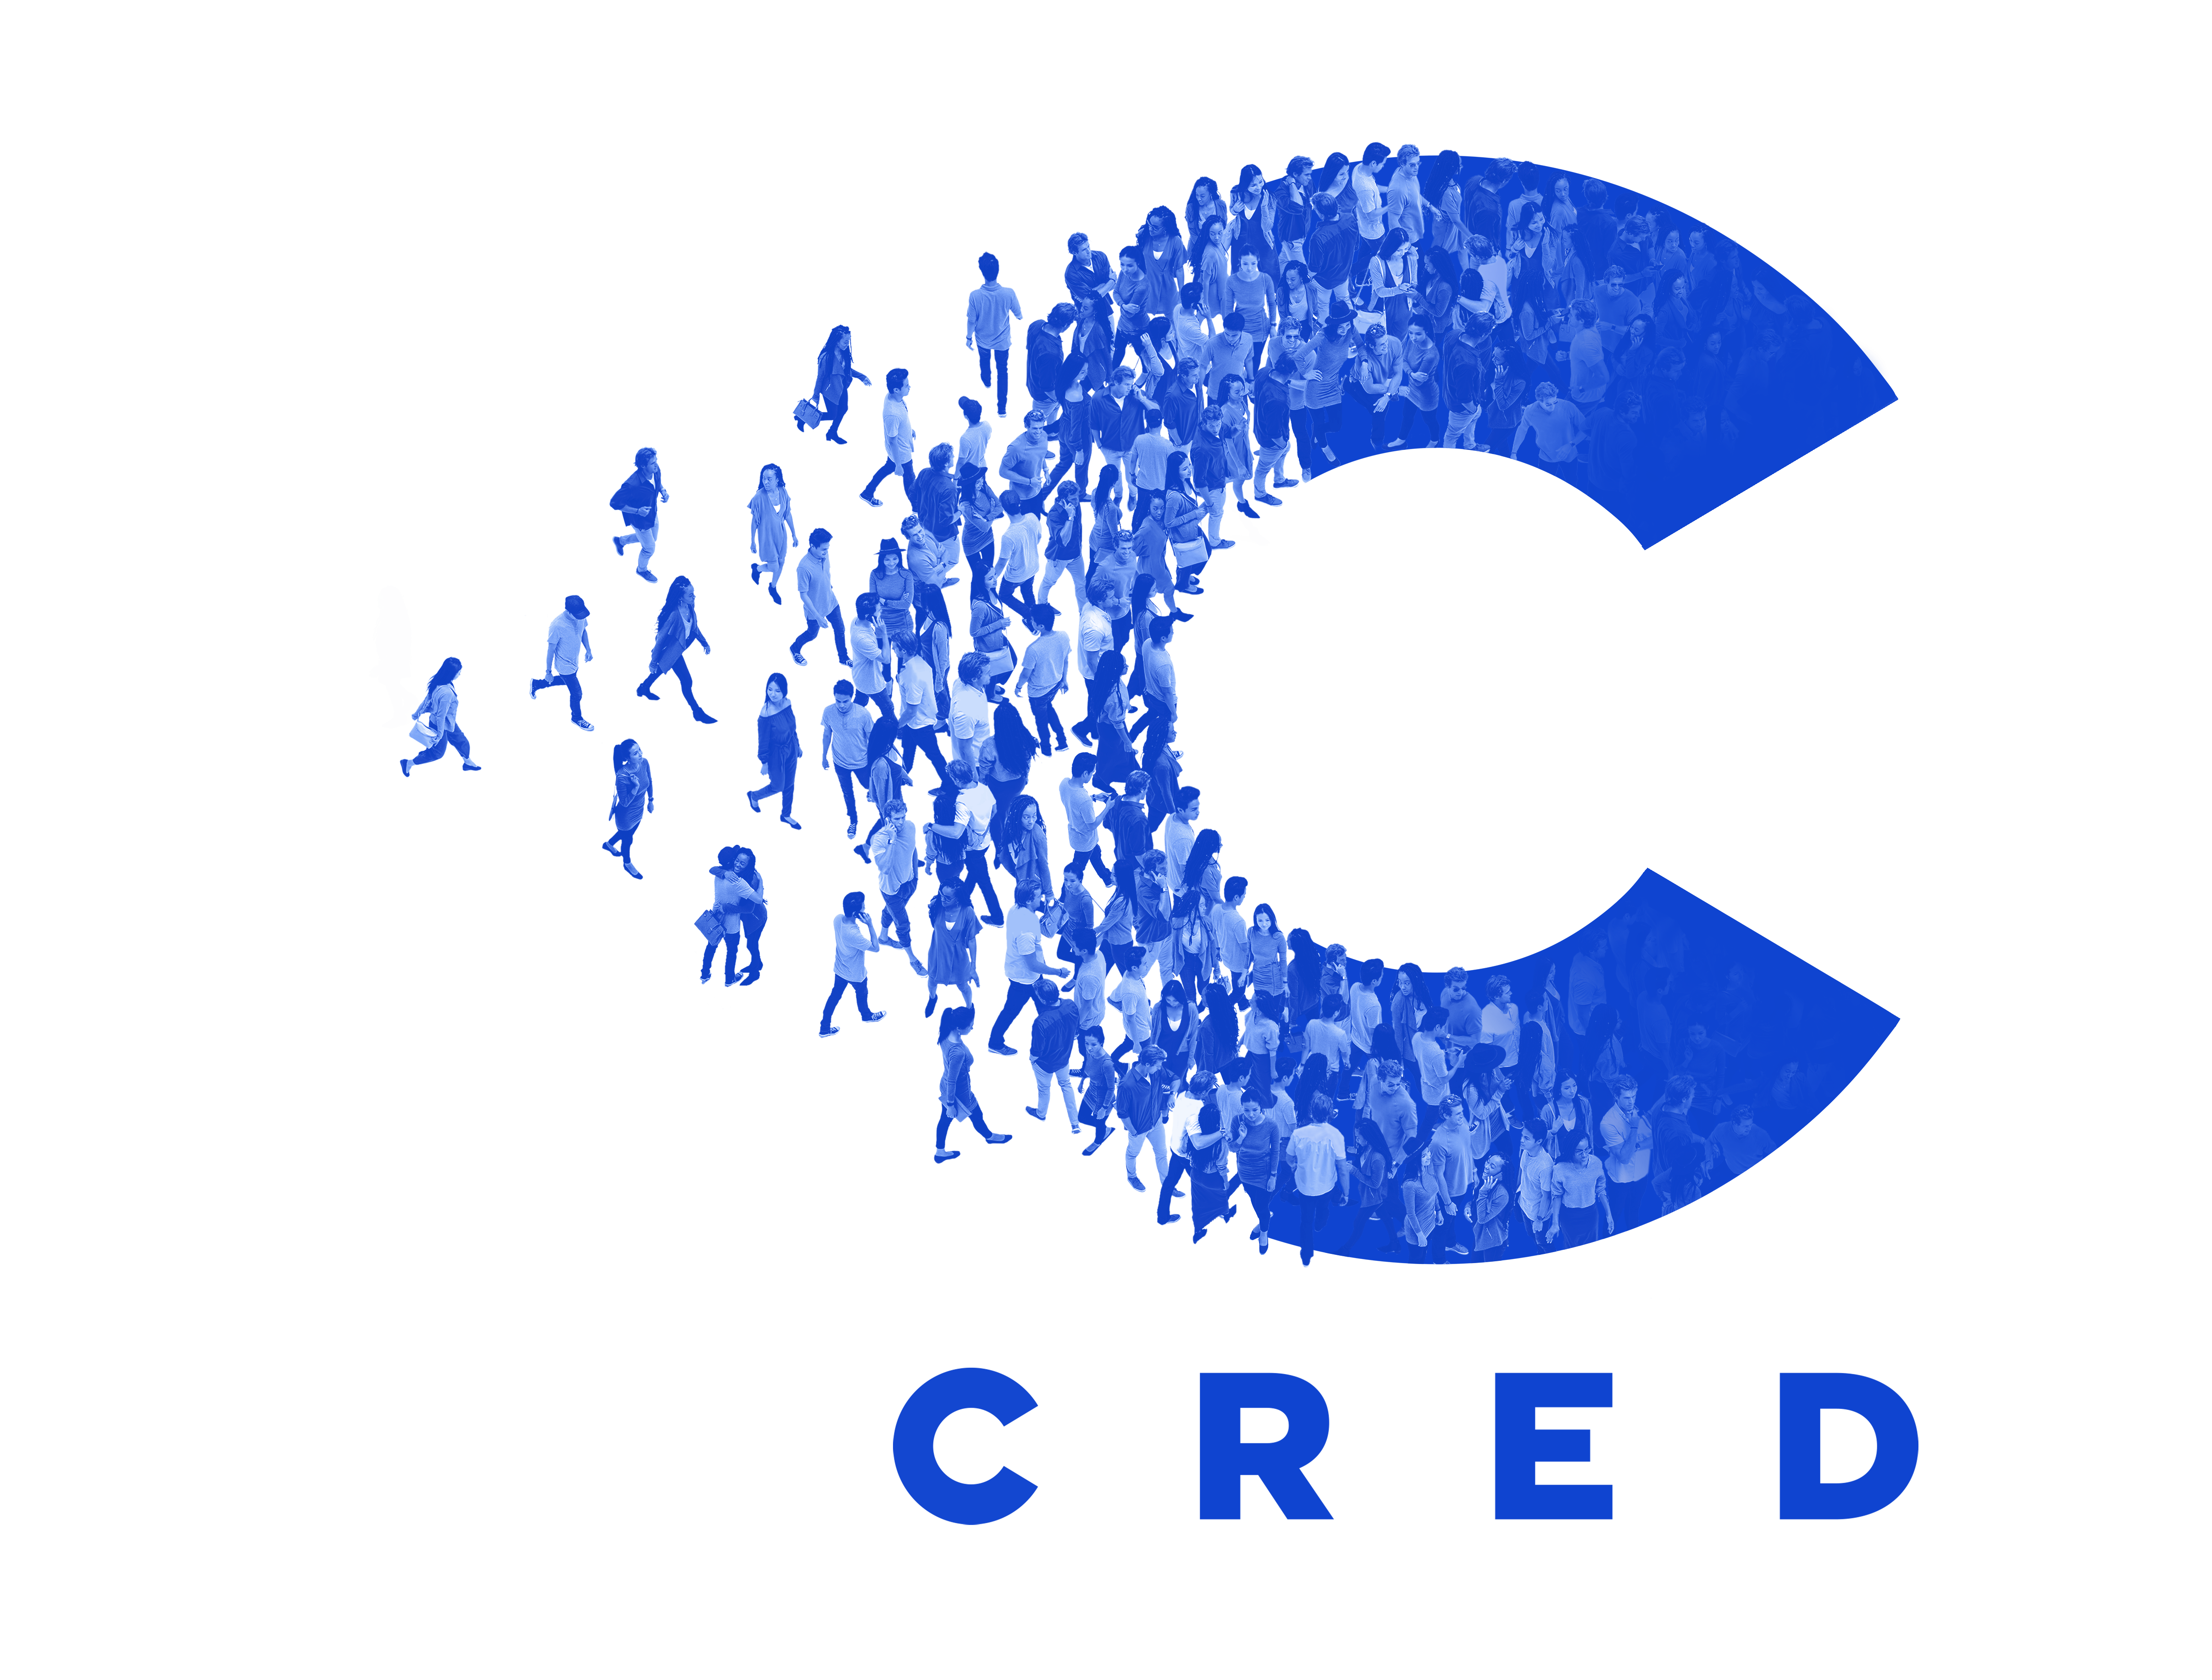 Bitcoin.com and Cred Partner to Offer Lending and Borrowing